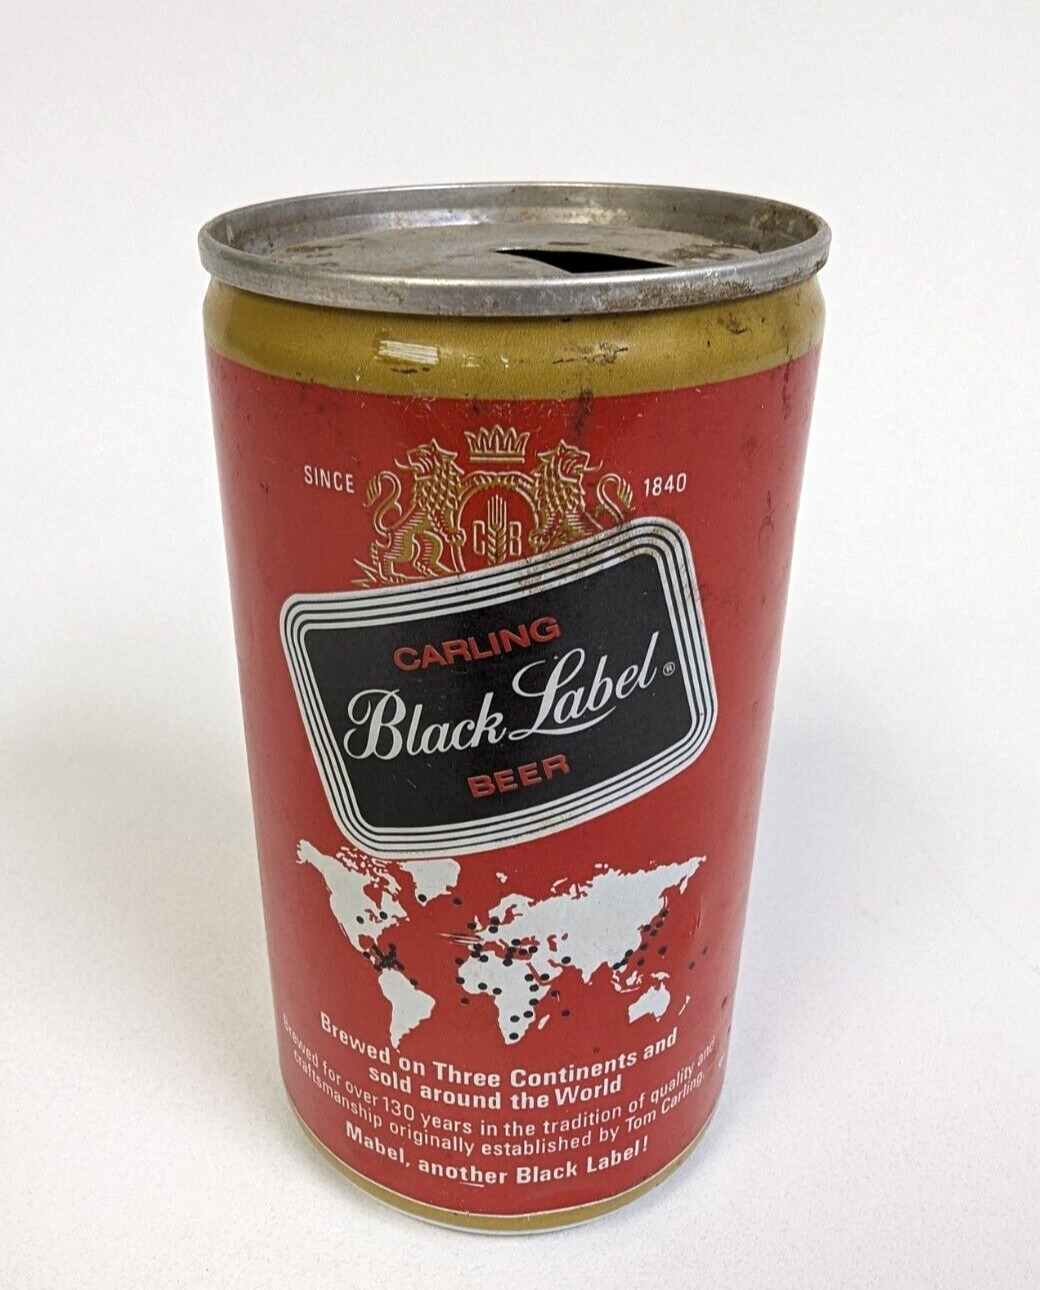 Carling Black Label Beer Vintage 12 oz Red and Gold Empty Metal Can